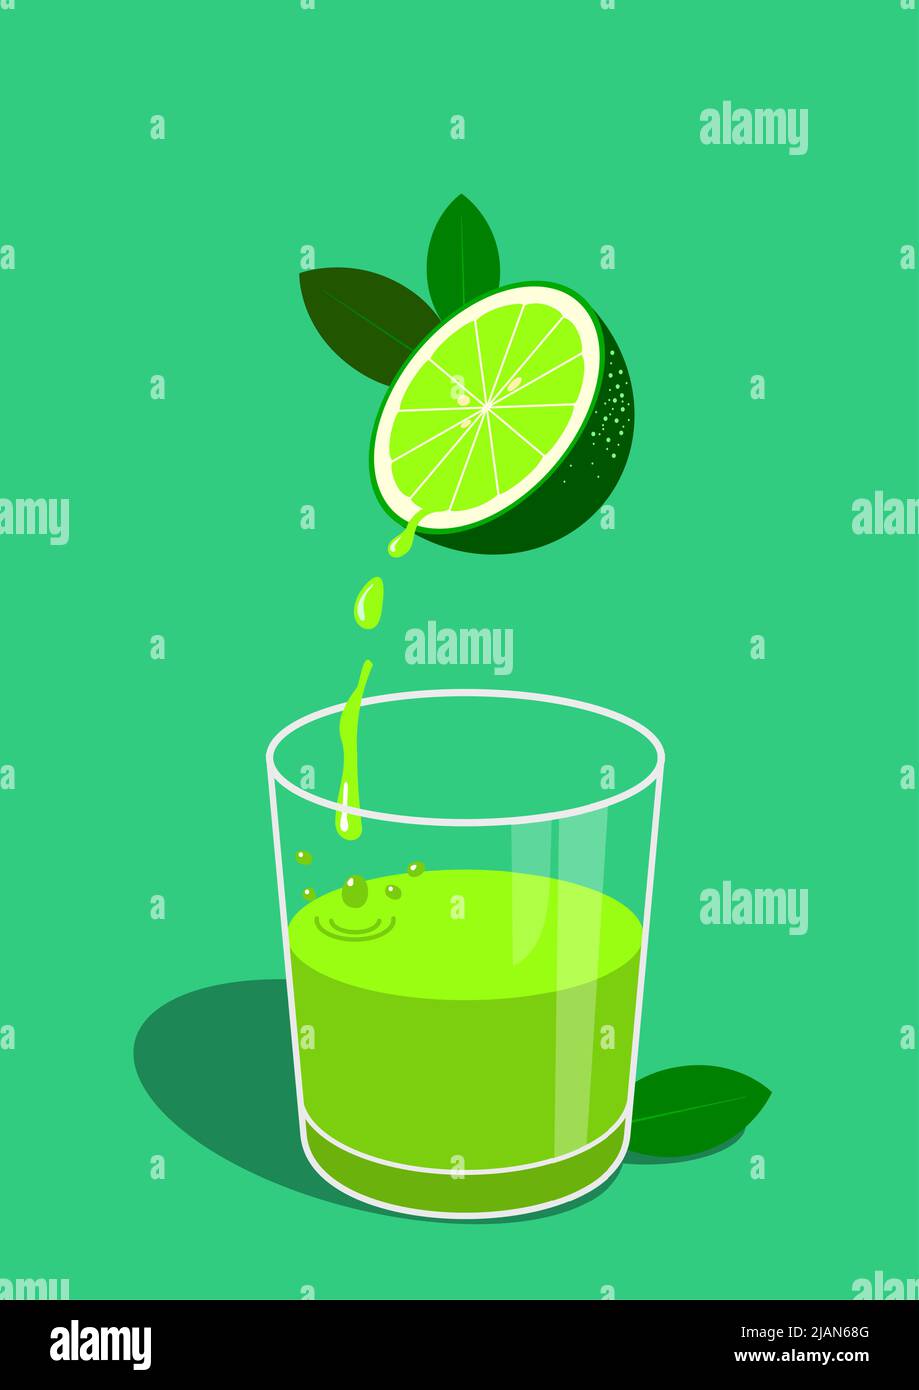 Healthy illustration of a half lime from which the juice flows into a glass underneath. Flat and vivid colors. Cool and fun Stock Vector